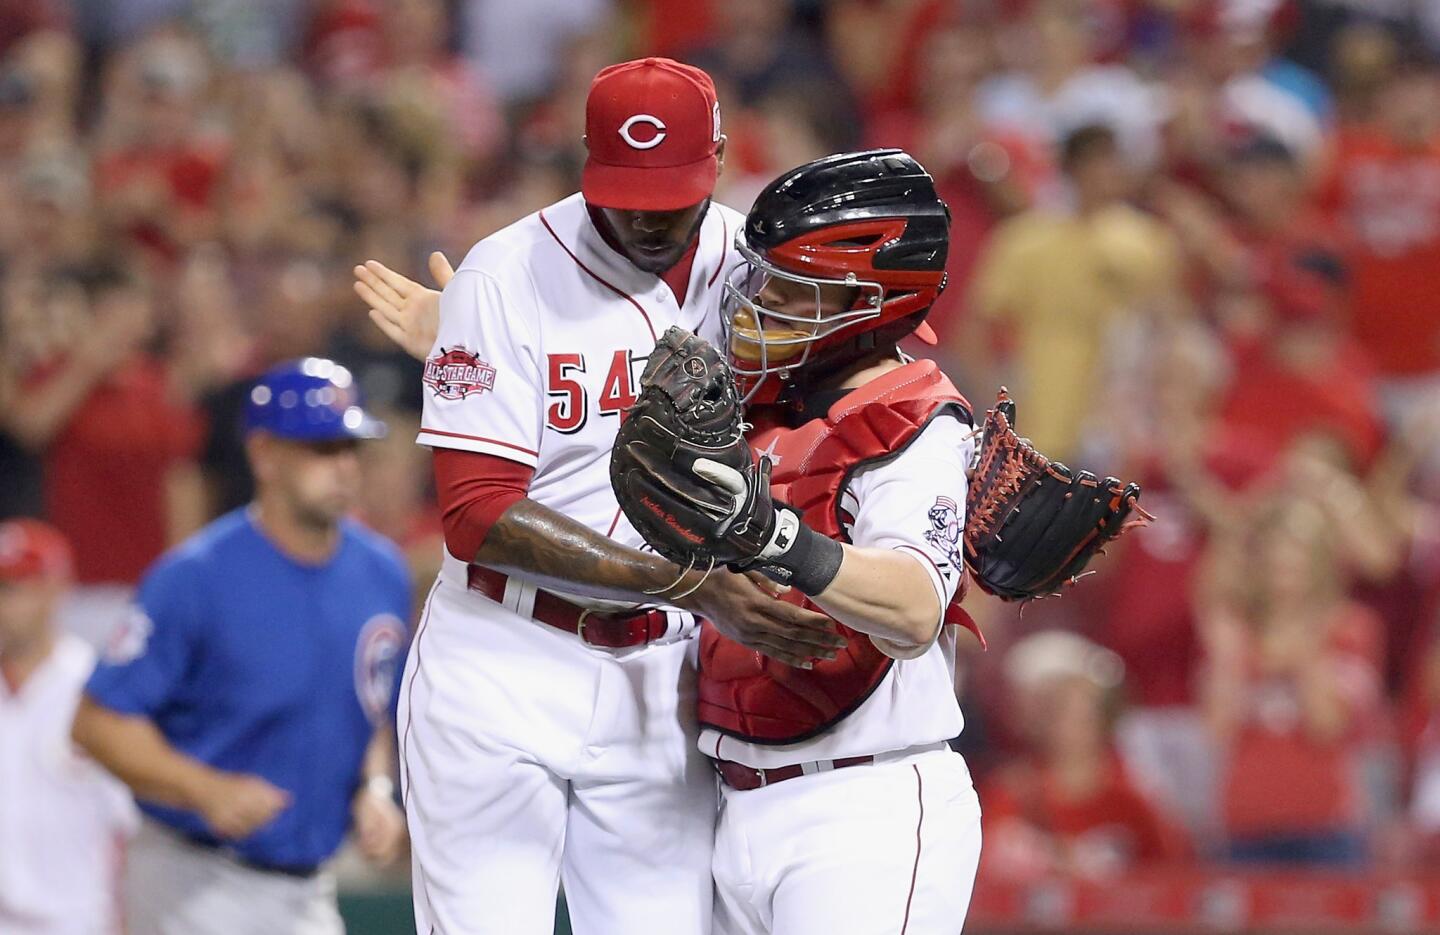 Aroldis Chapman and Tucker Barnhart celebrate after the 5-4 win over the Cubs.